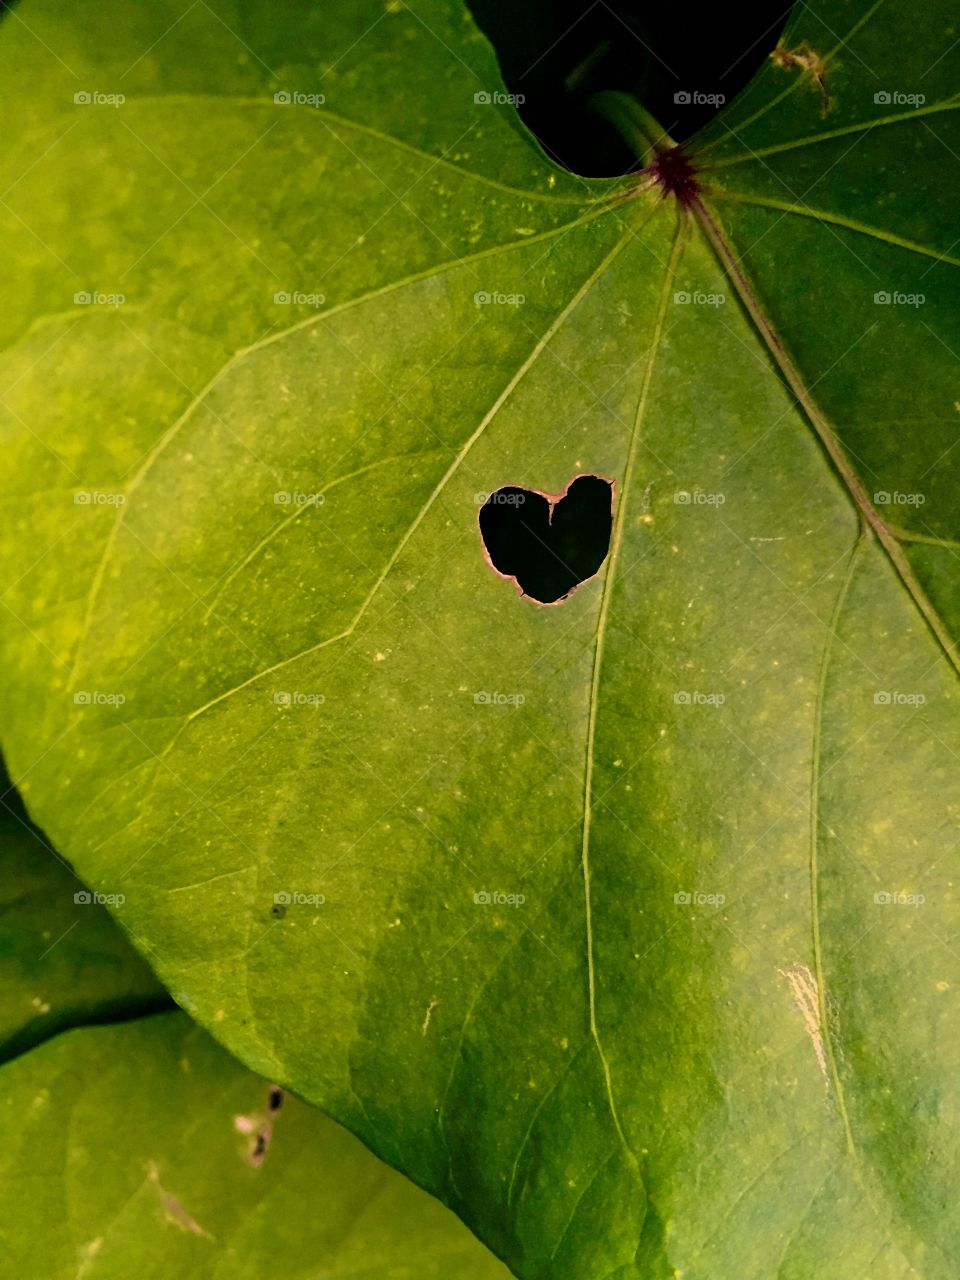 For the love of leaf